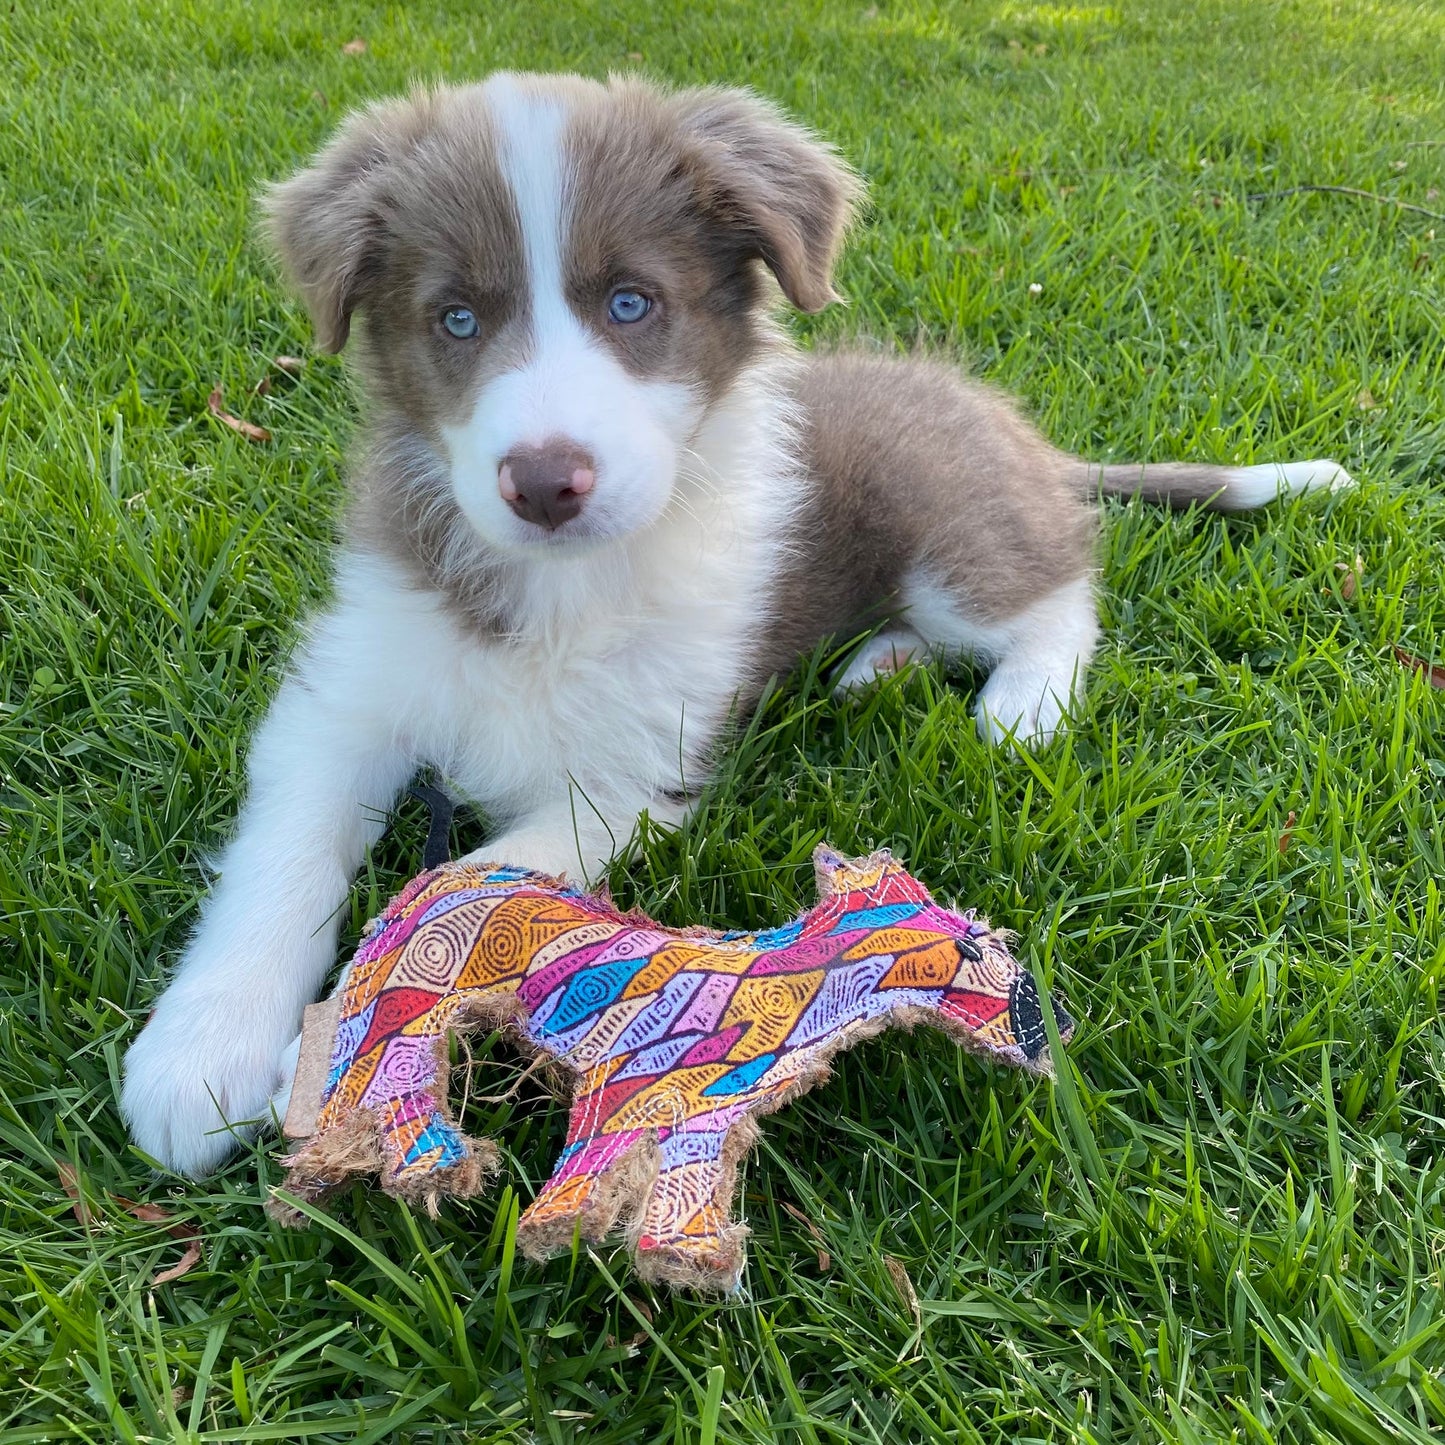 Cute blue eyed puppy playing with dog toy, desert dog Ben by outback tails on grass